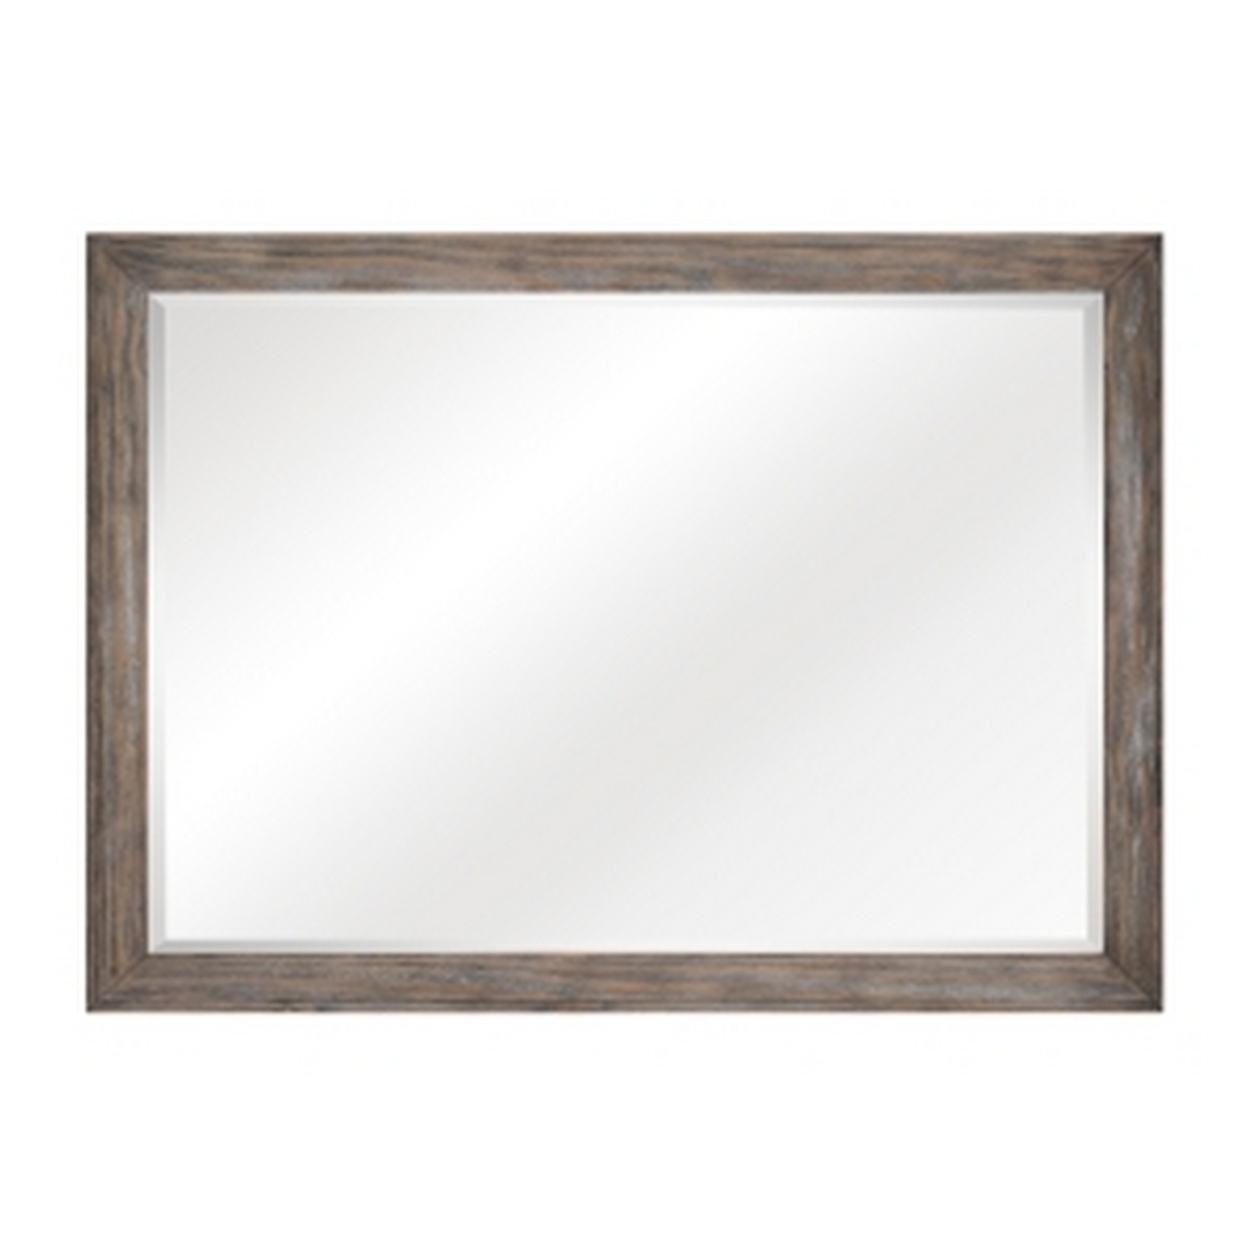 Cady 50 Inch Classic Accent Mirror, Recessed Picture Frame Molding, Gray- Saltoro Sherpi